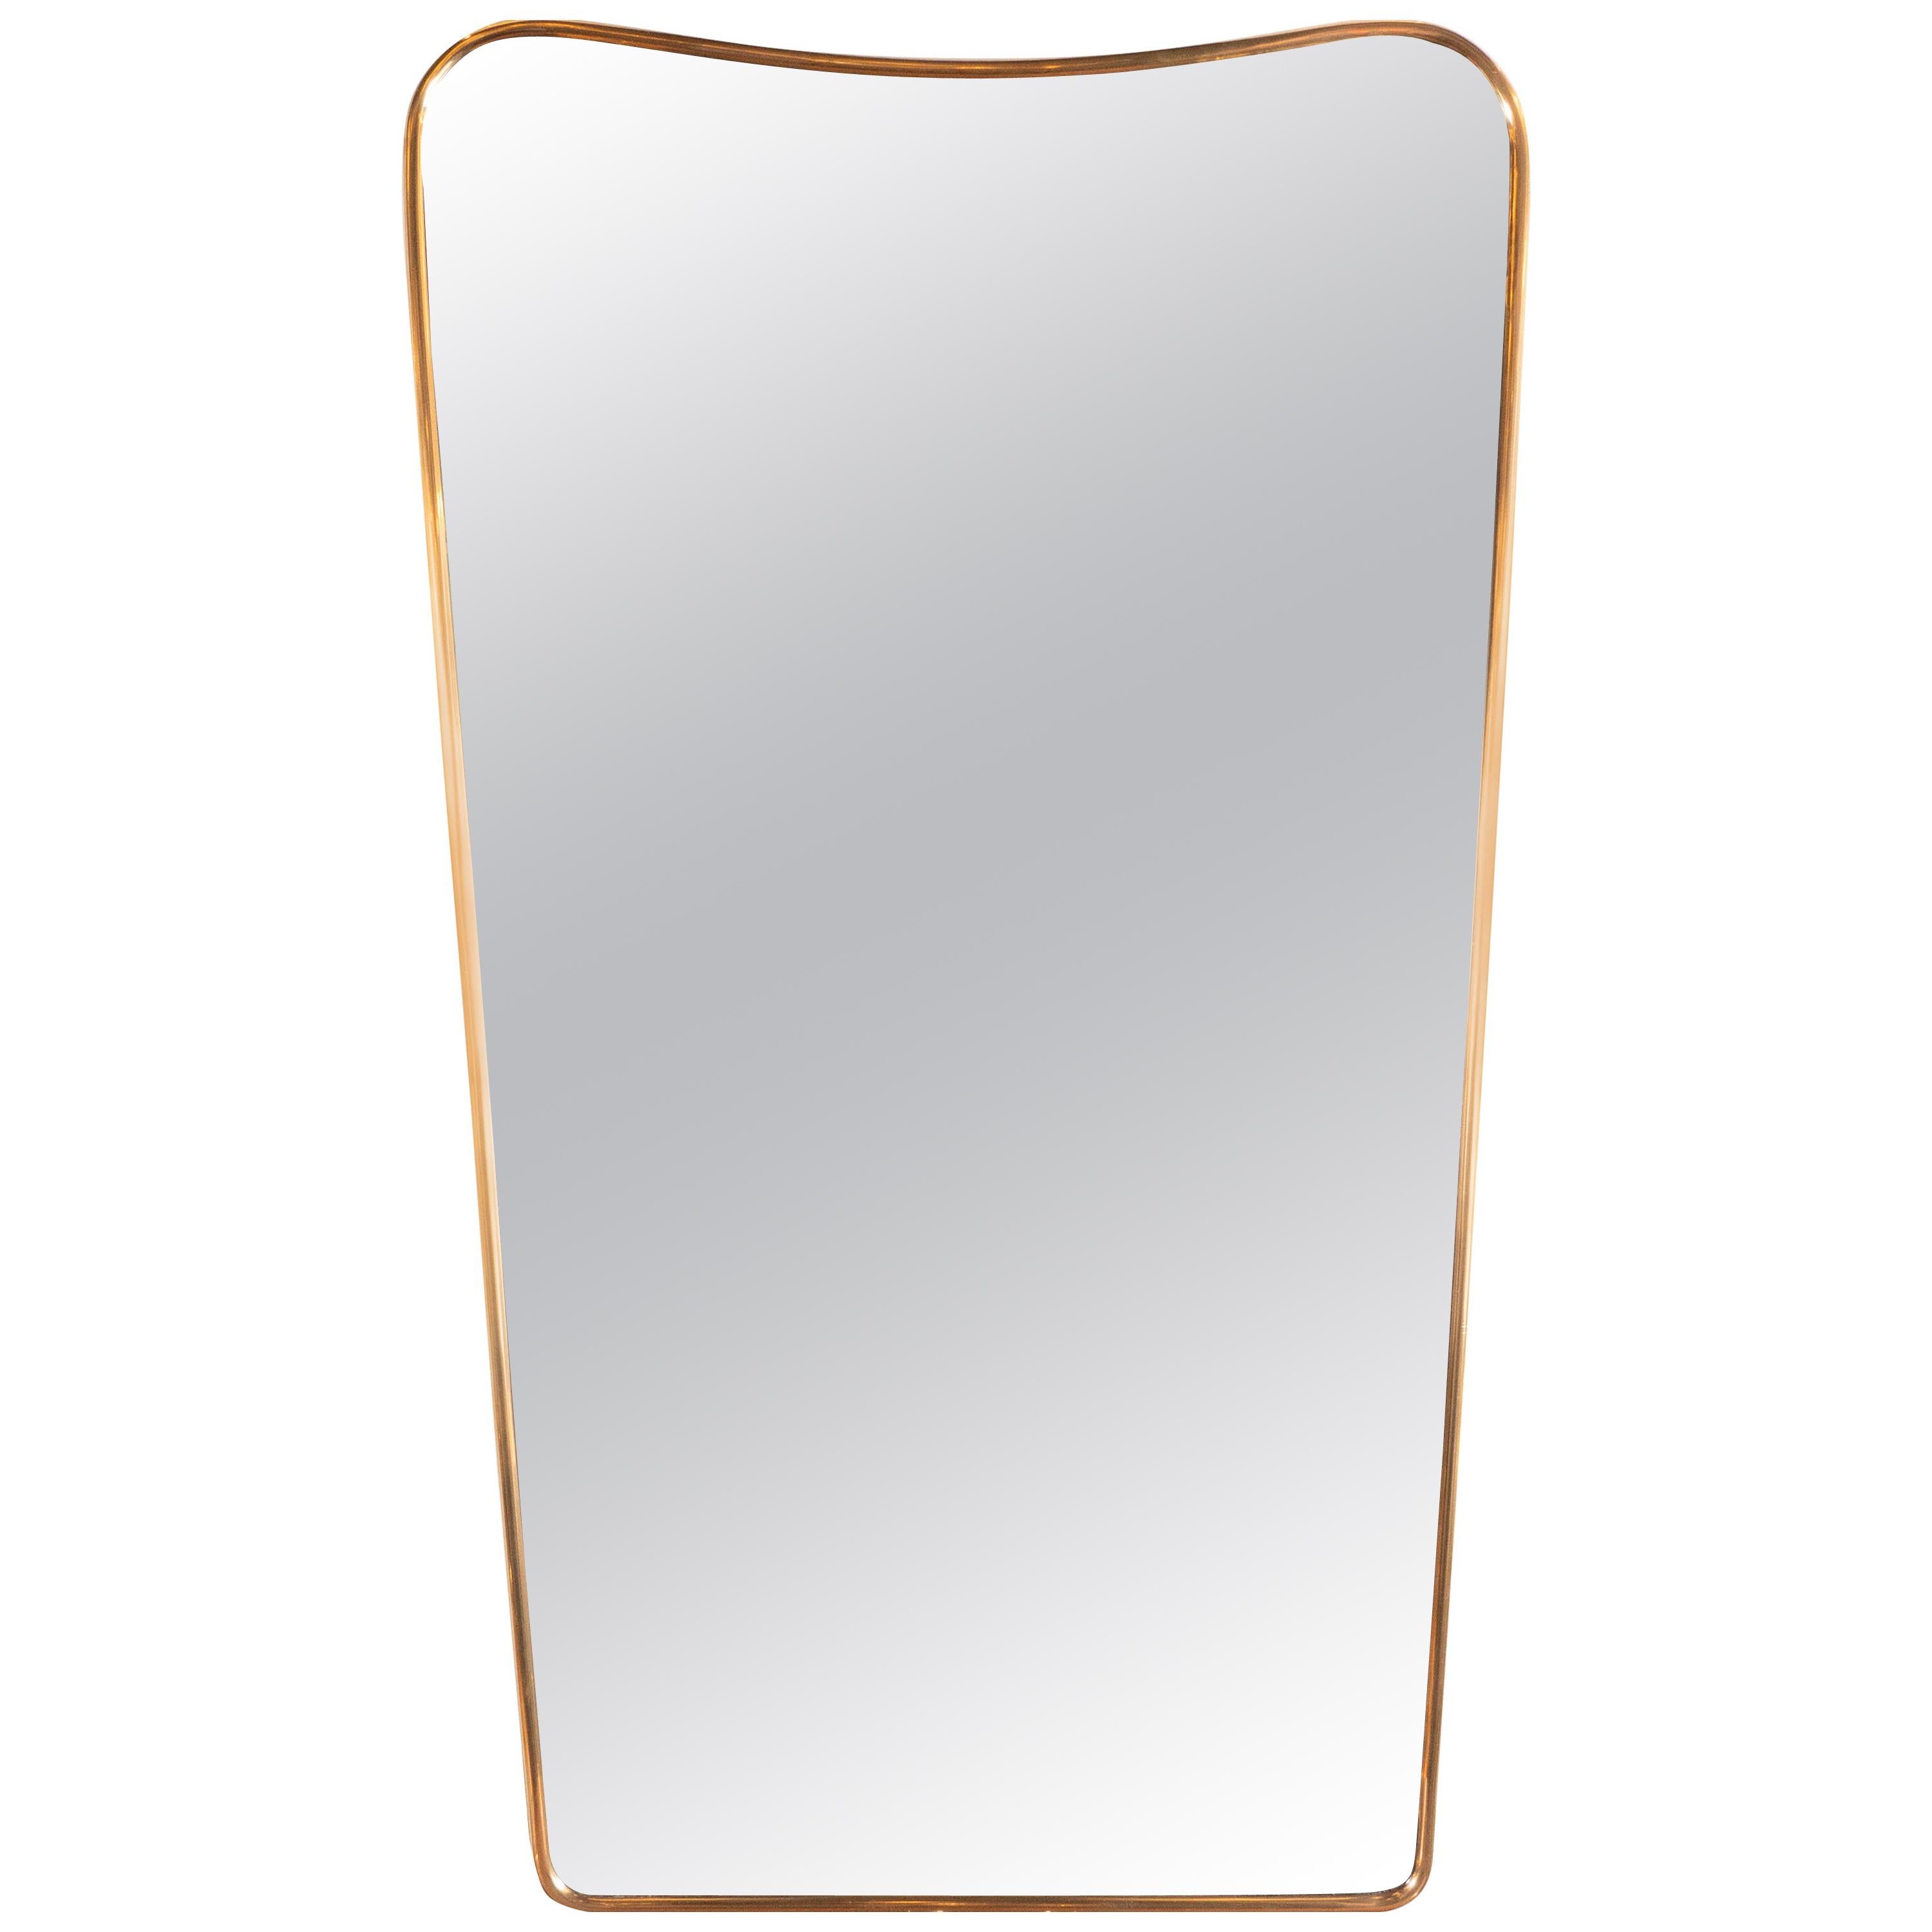 Italian Mid-Century Modern Brass Wrapped and Bowed Shield Form Mirror